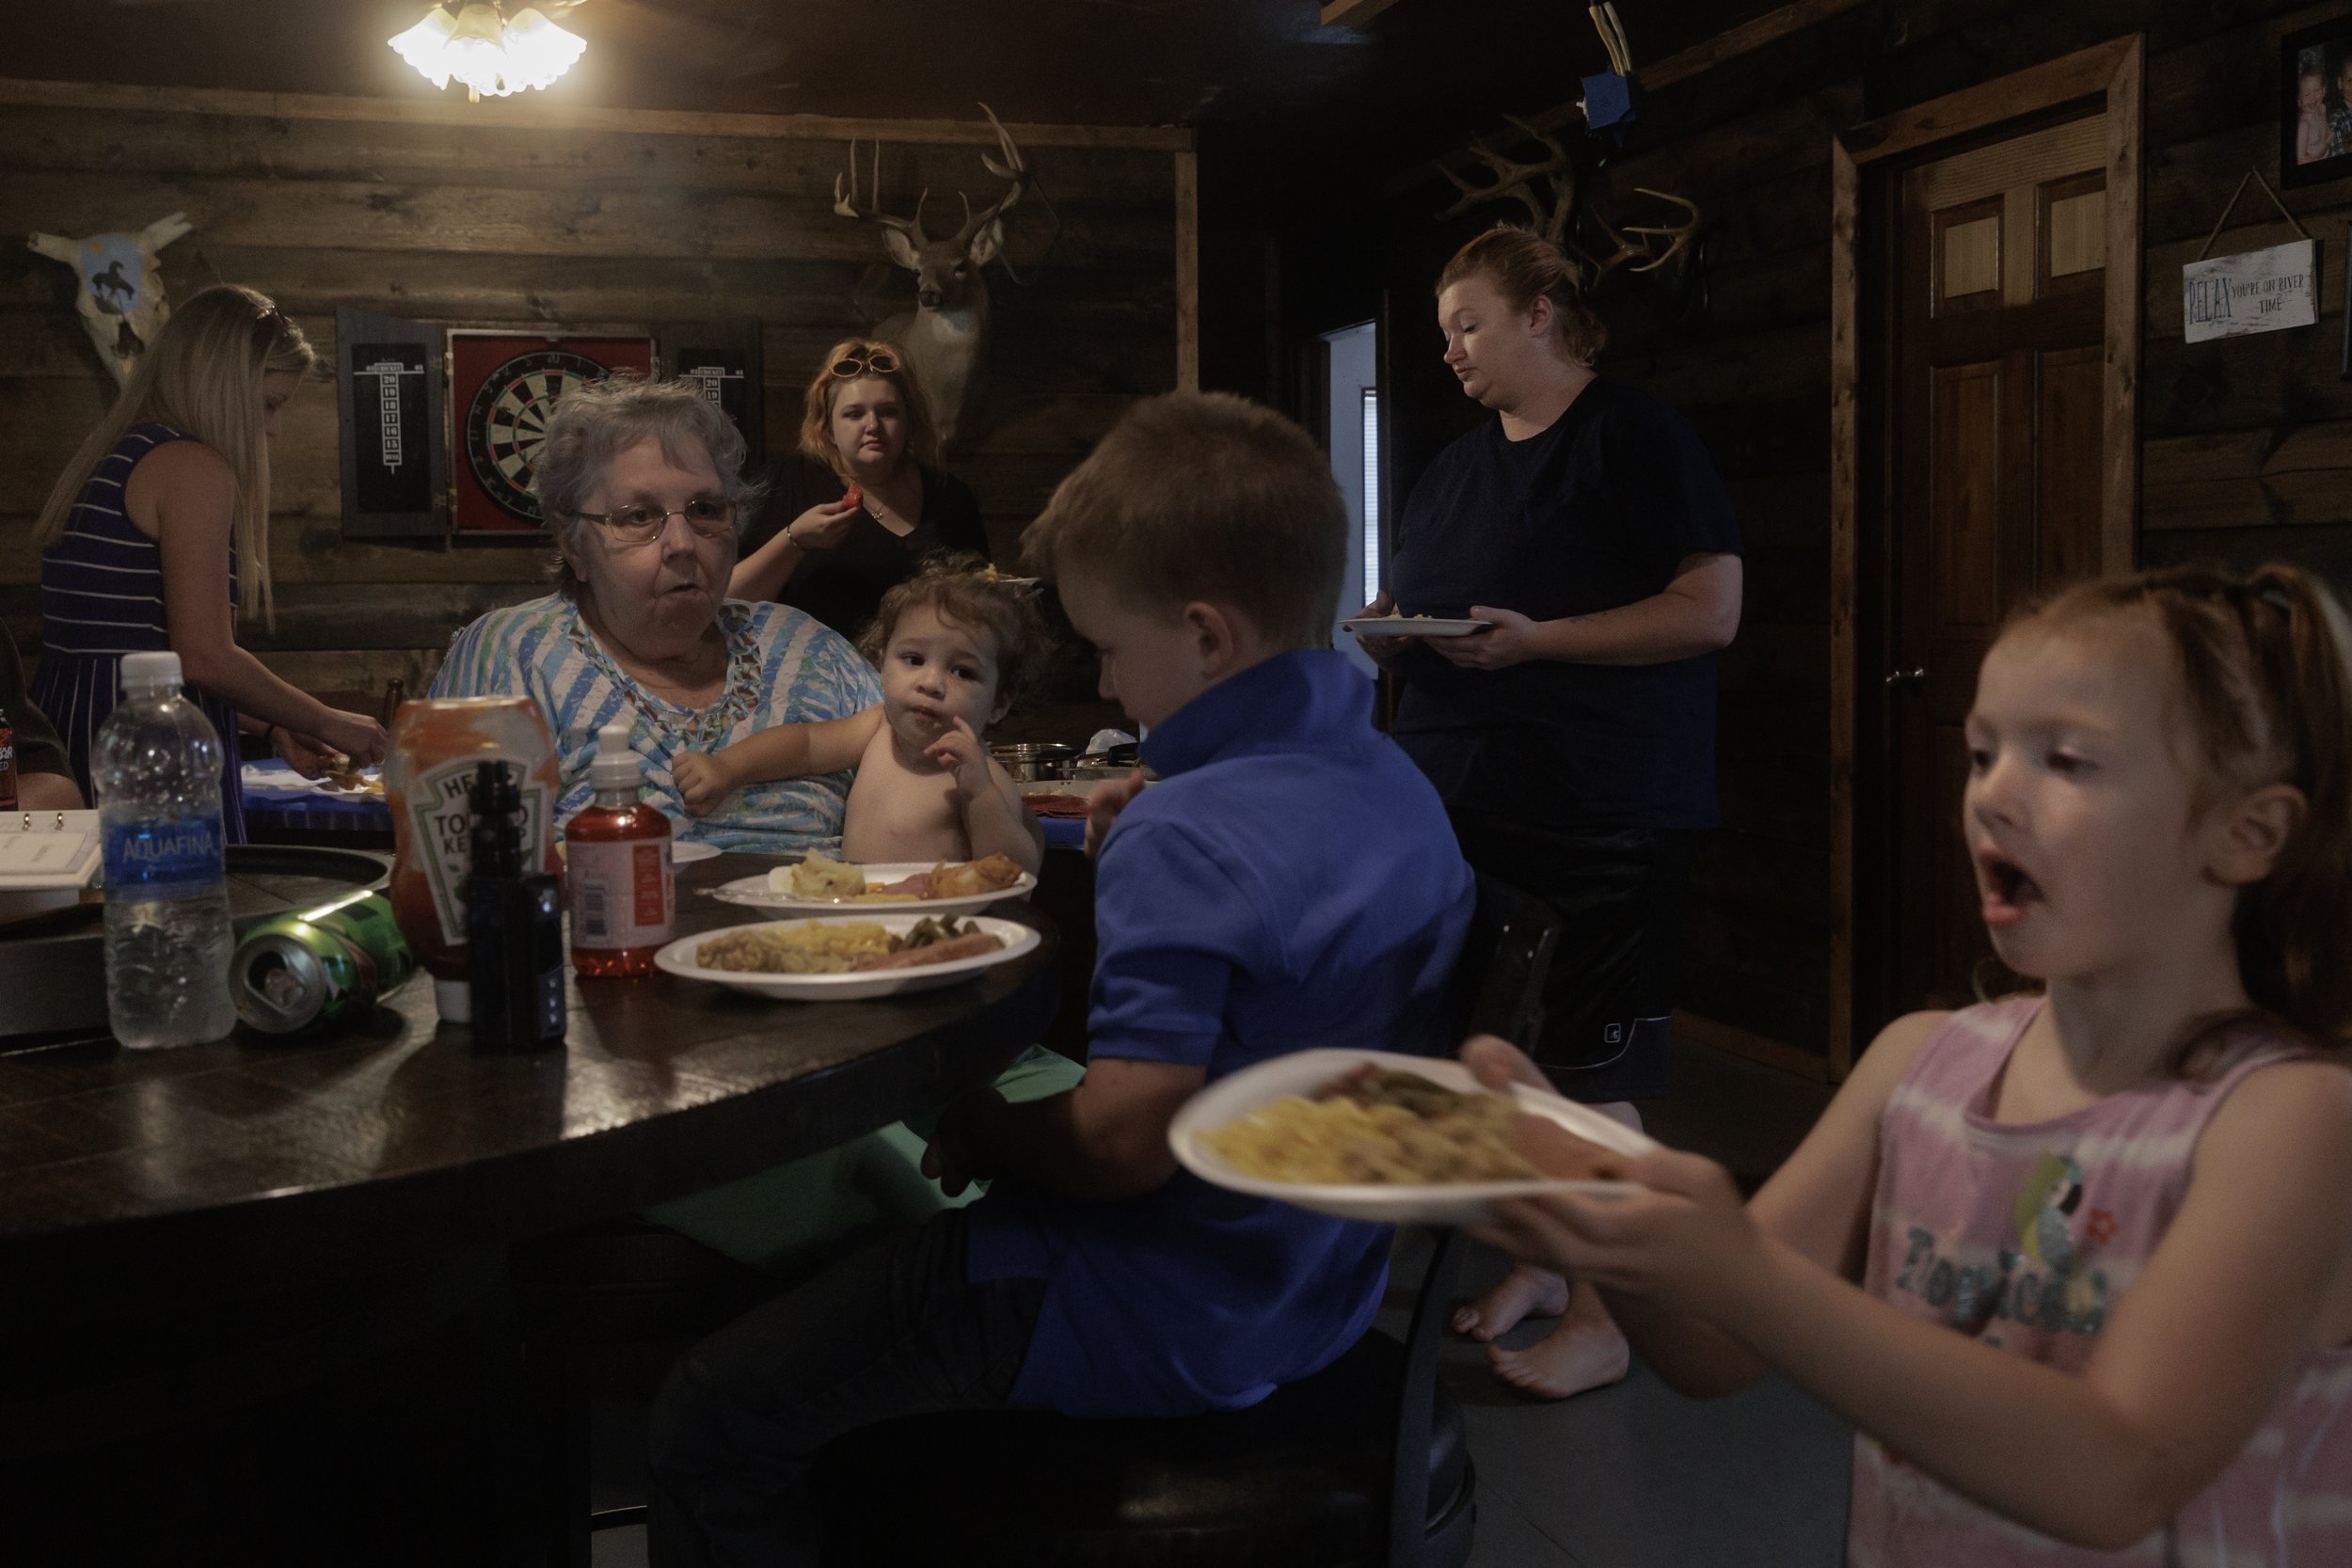  Michel’s family serves themselves plates of ham, mac and cheese, mashed potatoes and green beans. With Miranda on bedrest and Levi taking on extra shifts at the Tyson chicken processing plant to keep up with bills, Miranda’s sister moved in to help 